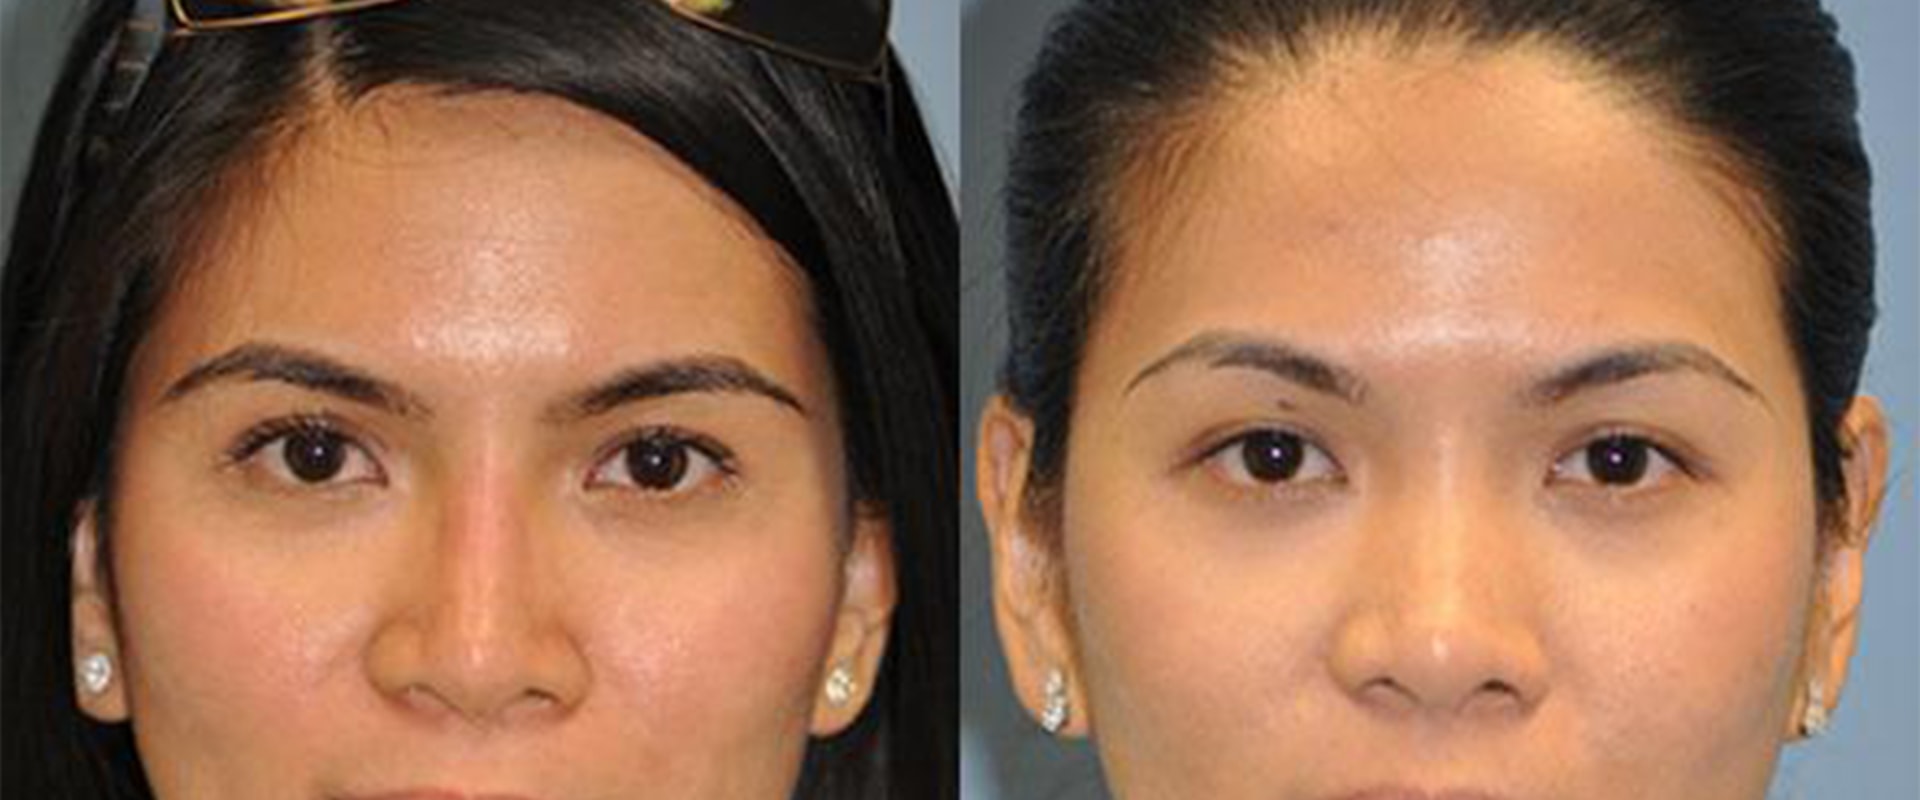 Liquid Rhinoplasty: A Non-Surgical Alternative for Nose Reshaping